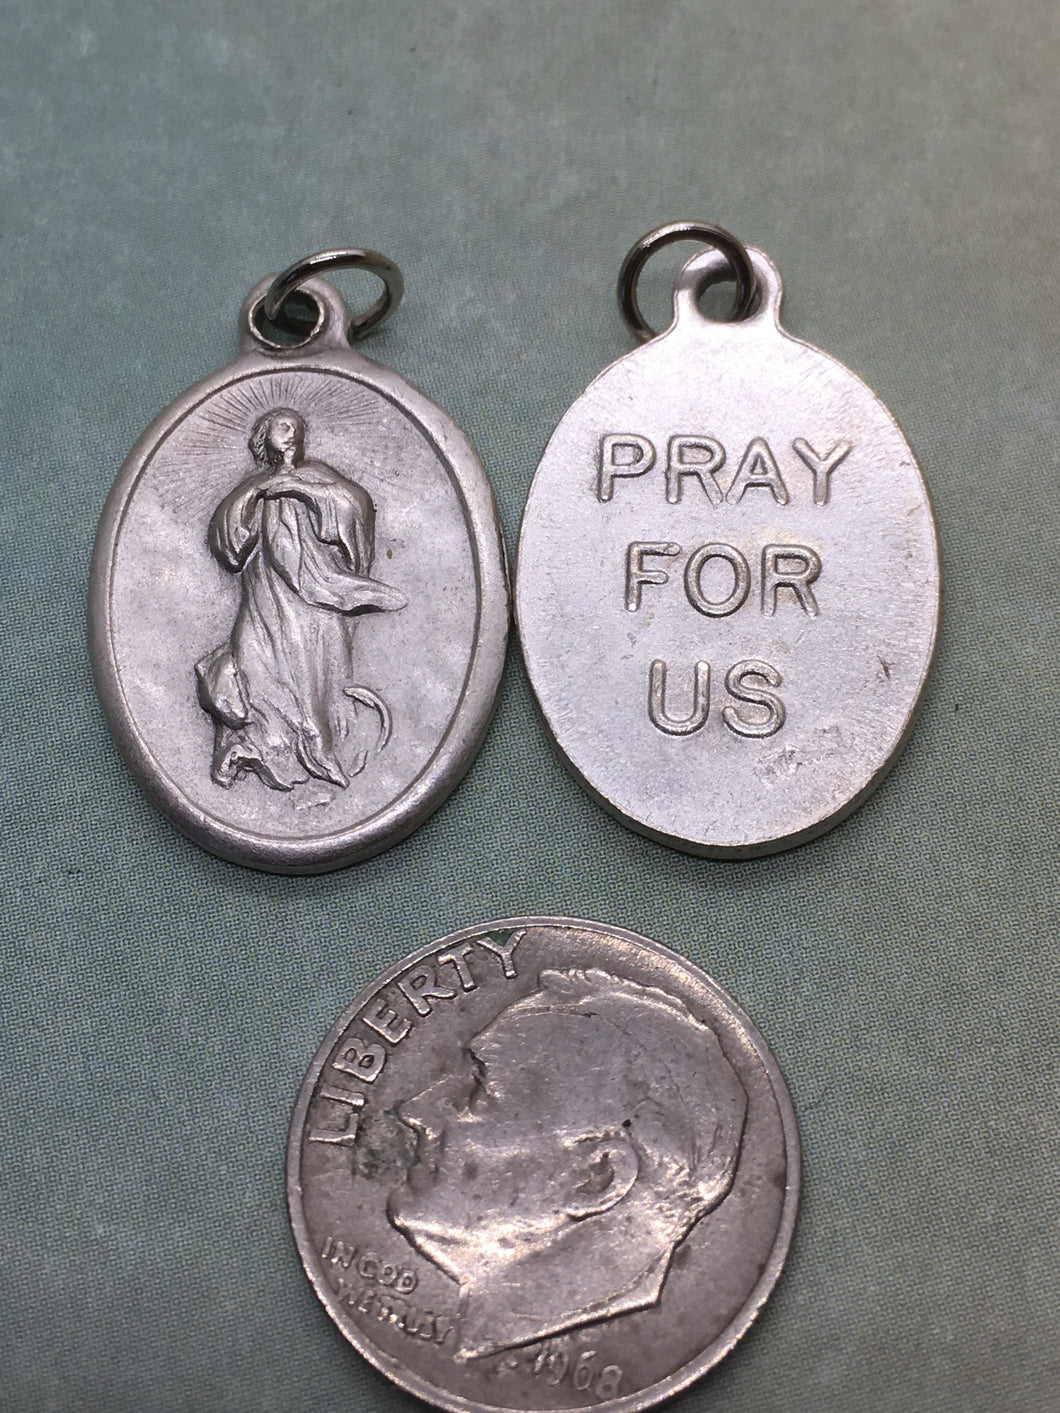 The Assumption of Mary holy medal